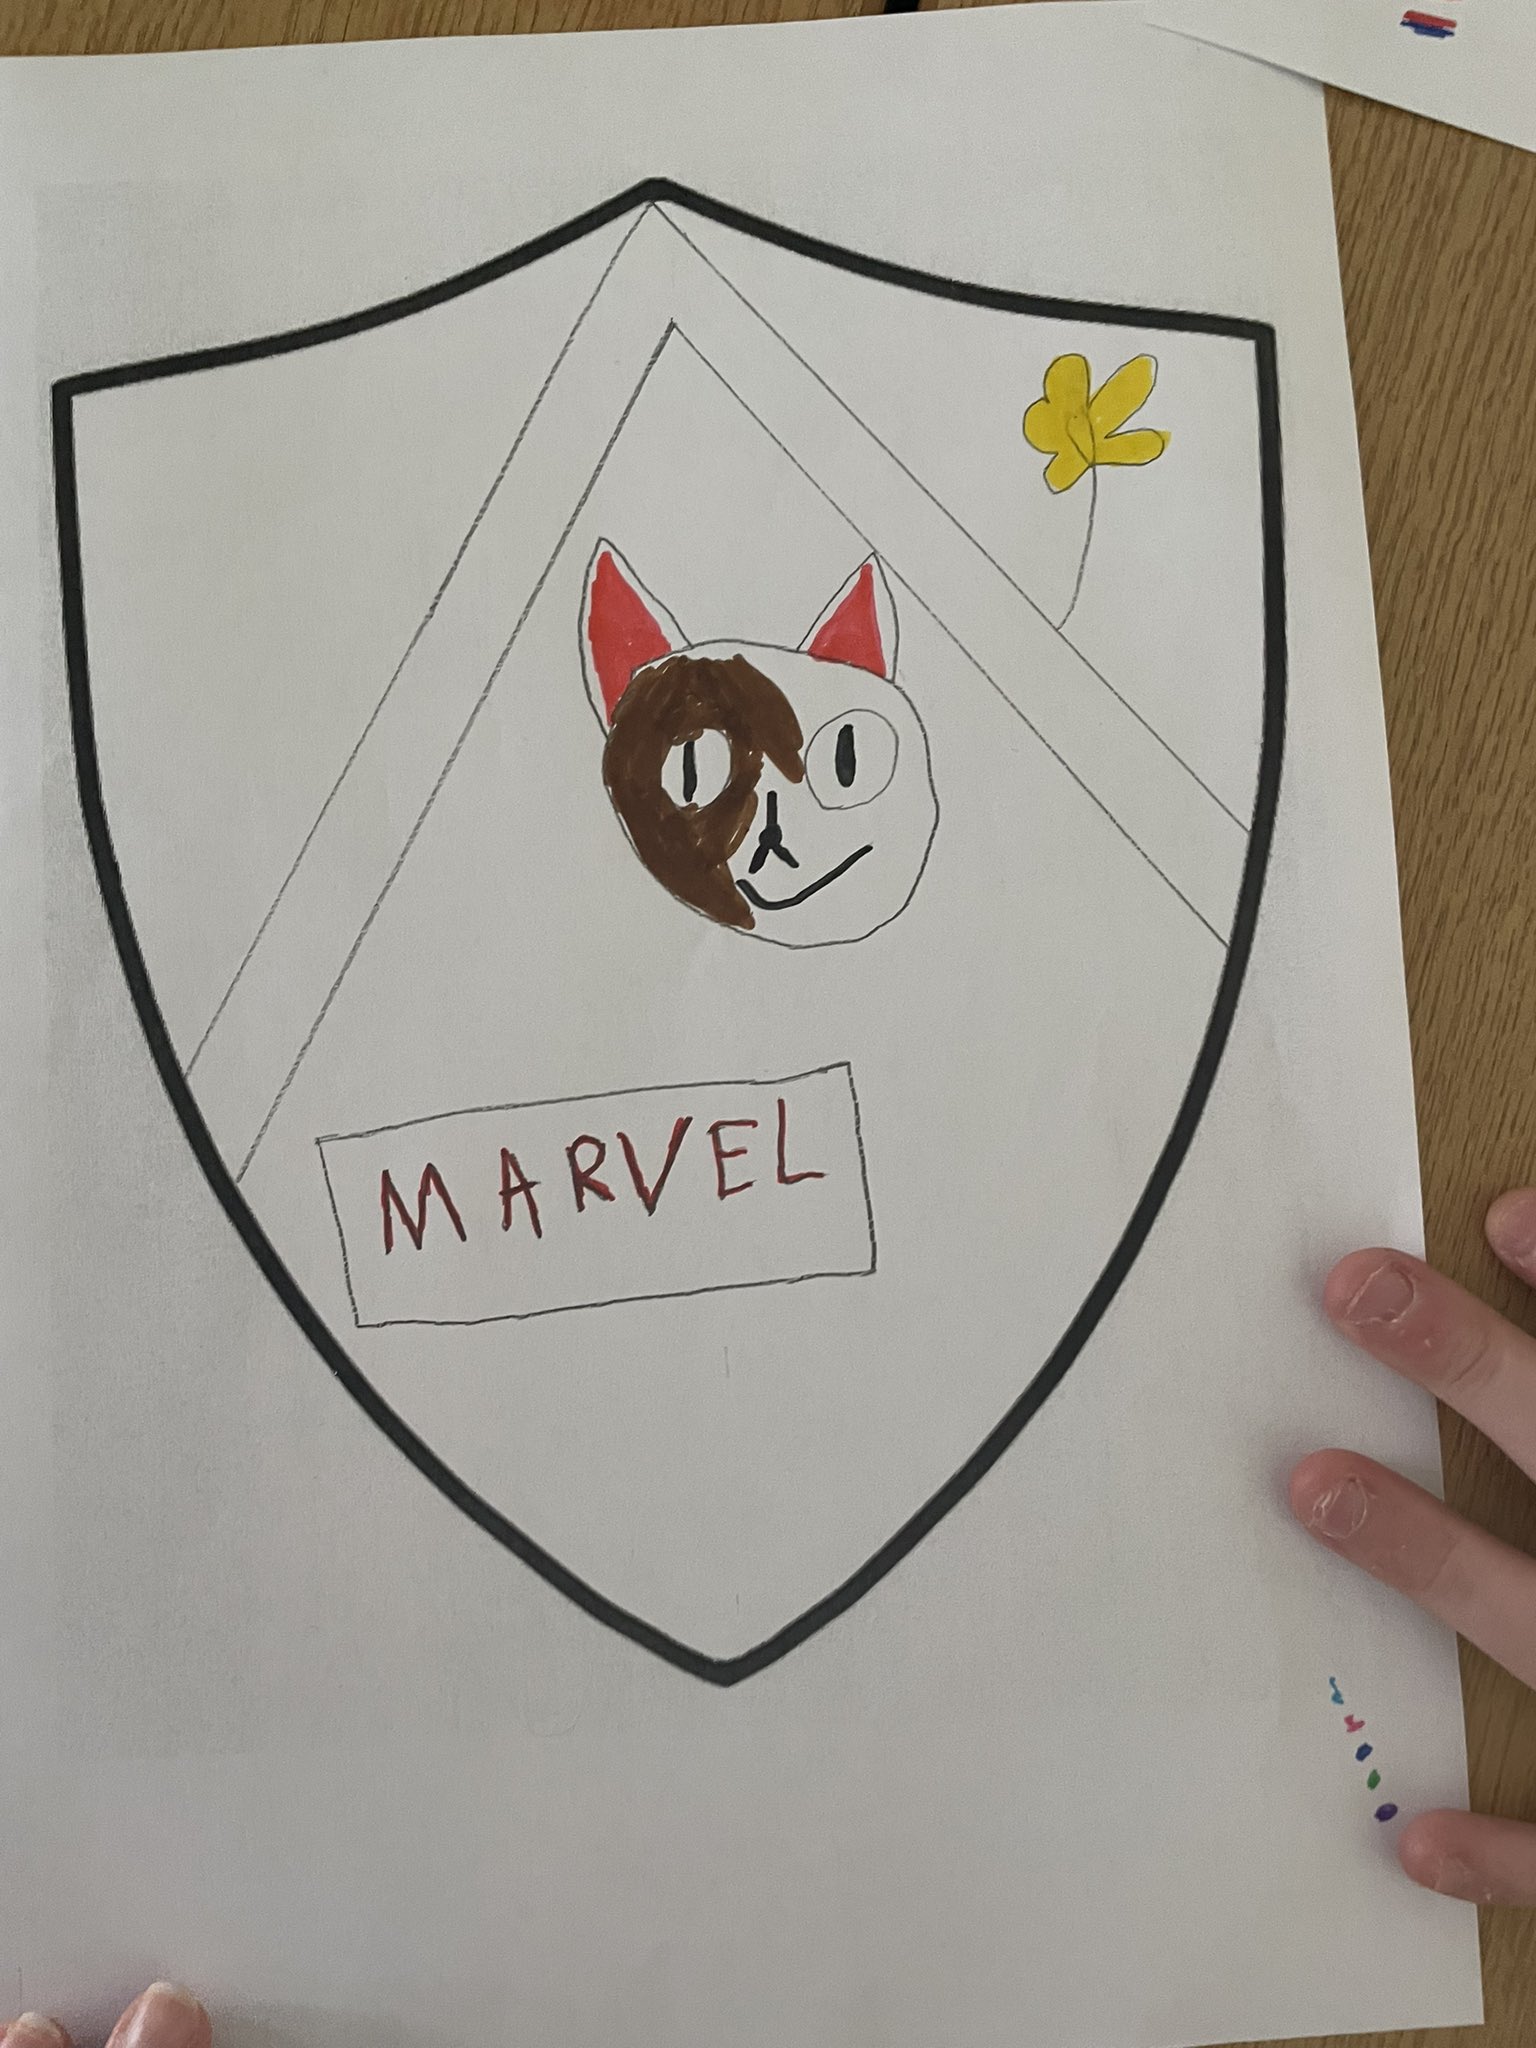 A shield with a chevron, a drawing of a cats head and 'Marvel' written below